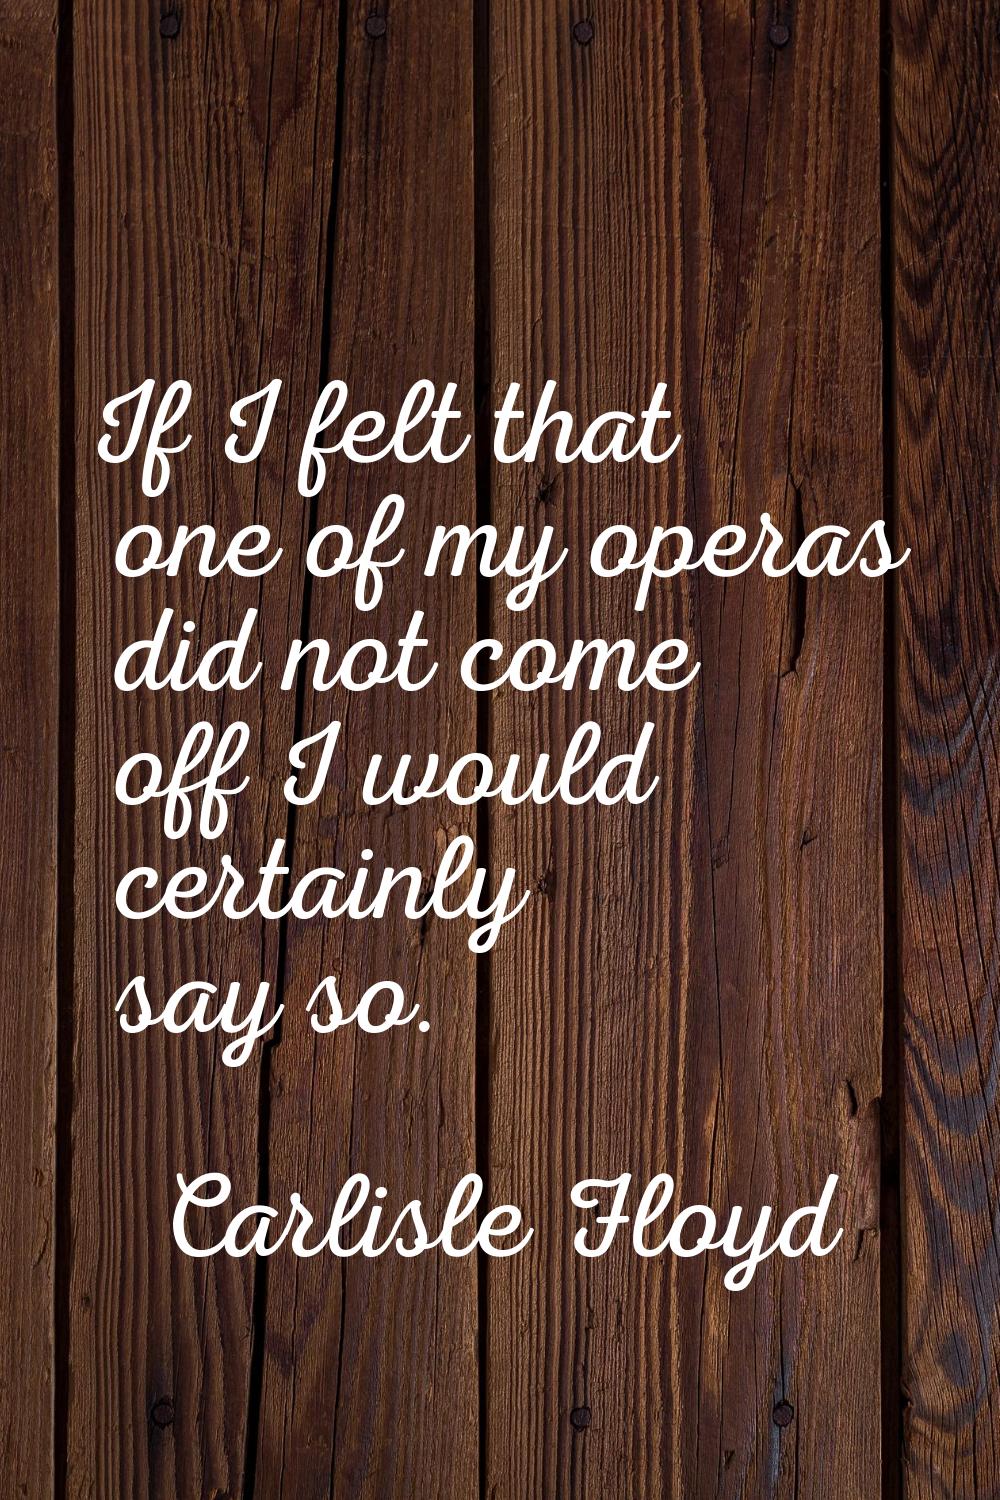 If I felt that one of my operas did not come off I would certainly say so.